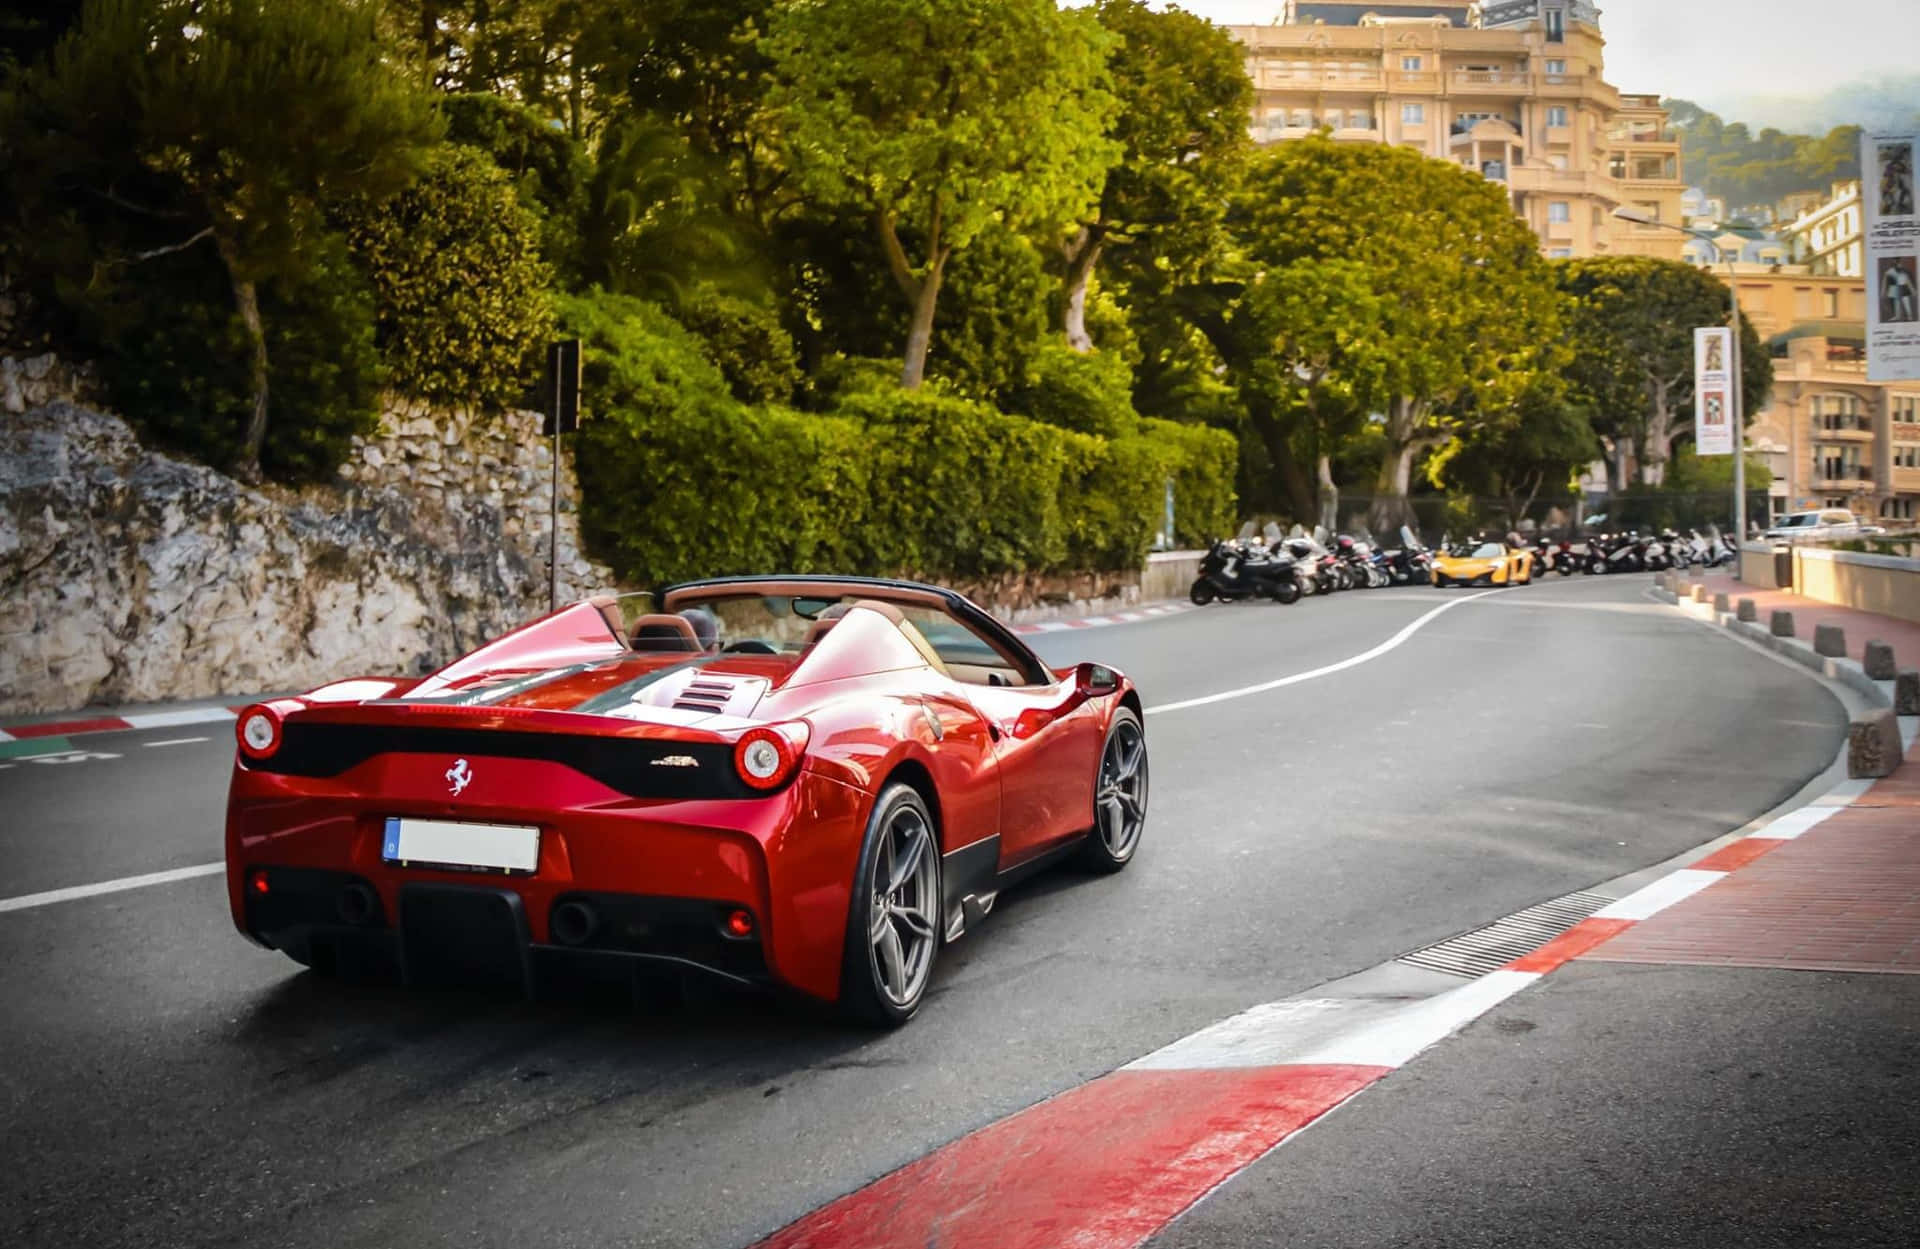 A stunning red Ferrari 458 Speciale in motion Wallpaper